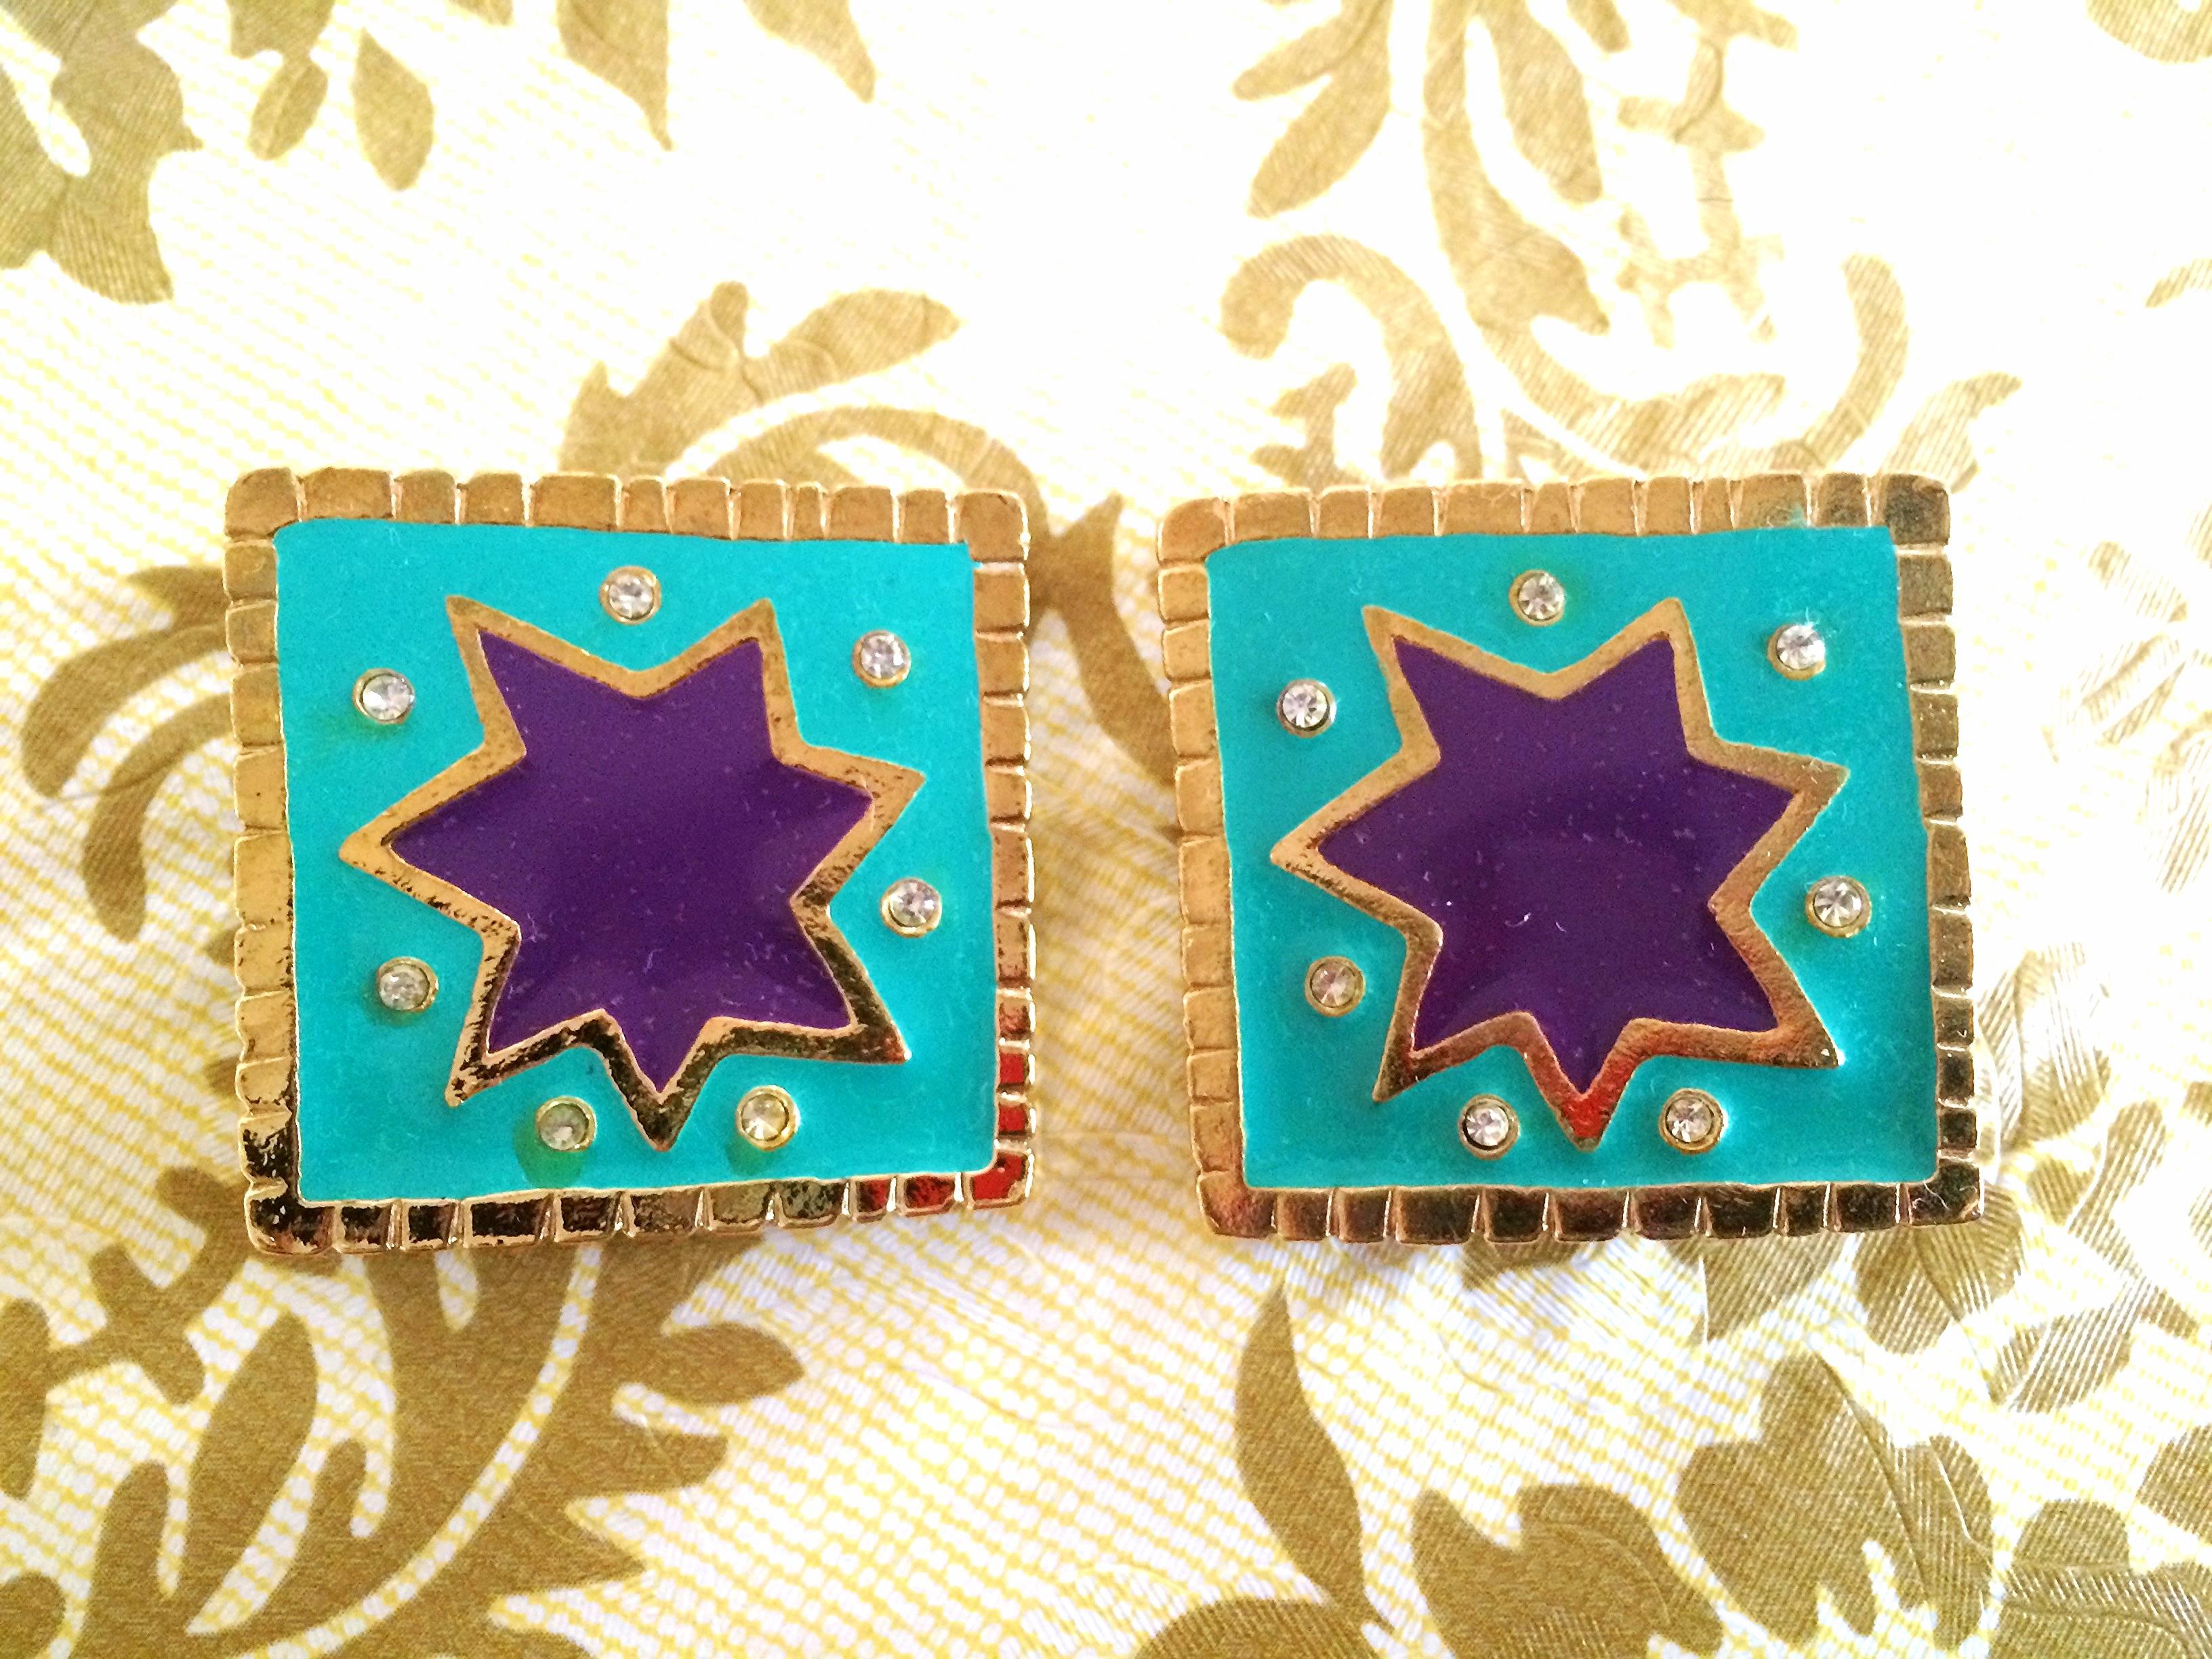 Vintage Christian Lacroix blue and purple enamel large square earrings, crystals For Sale 2